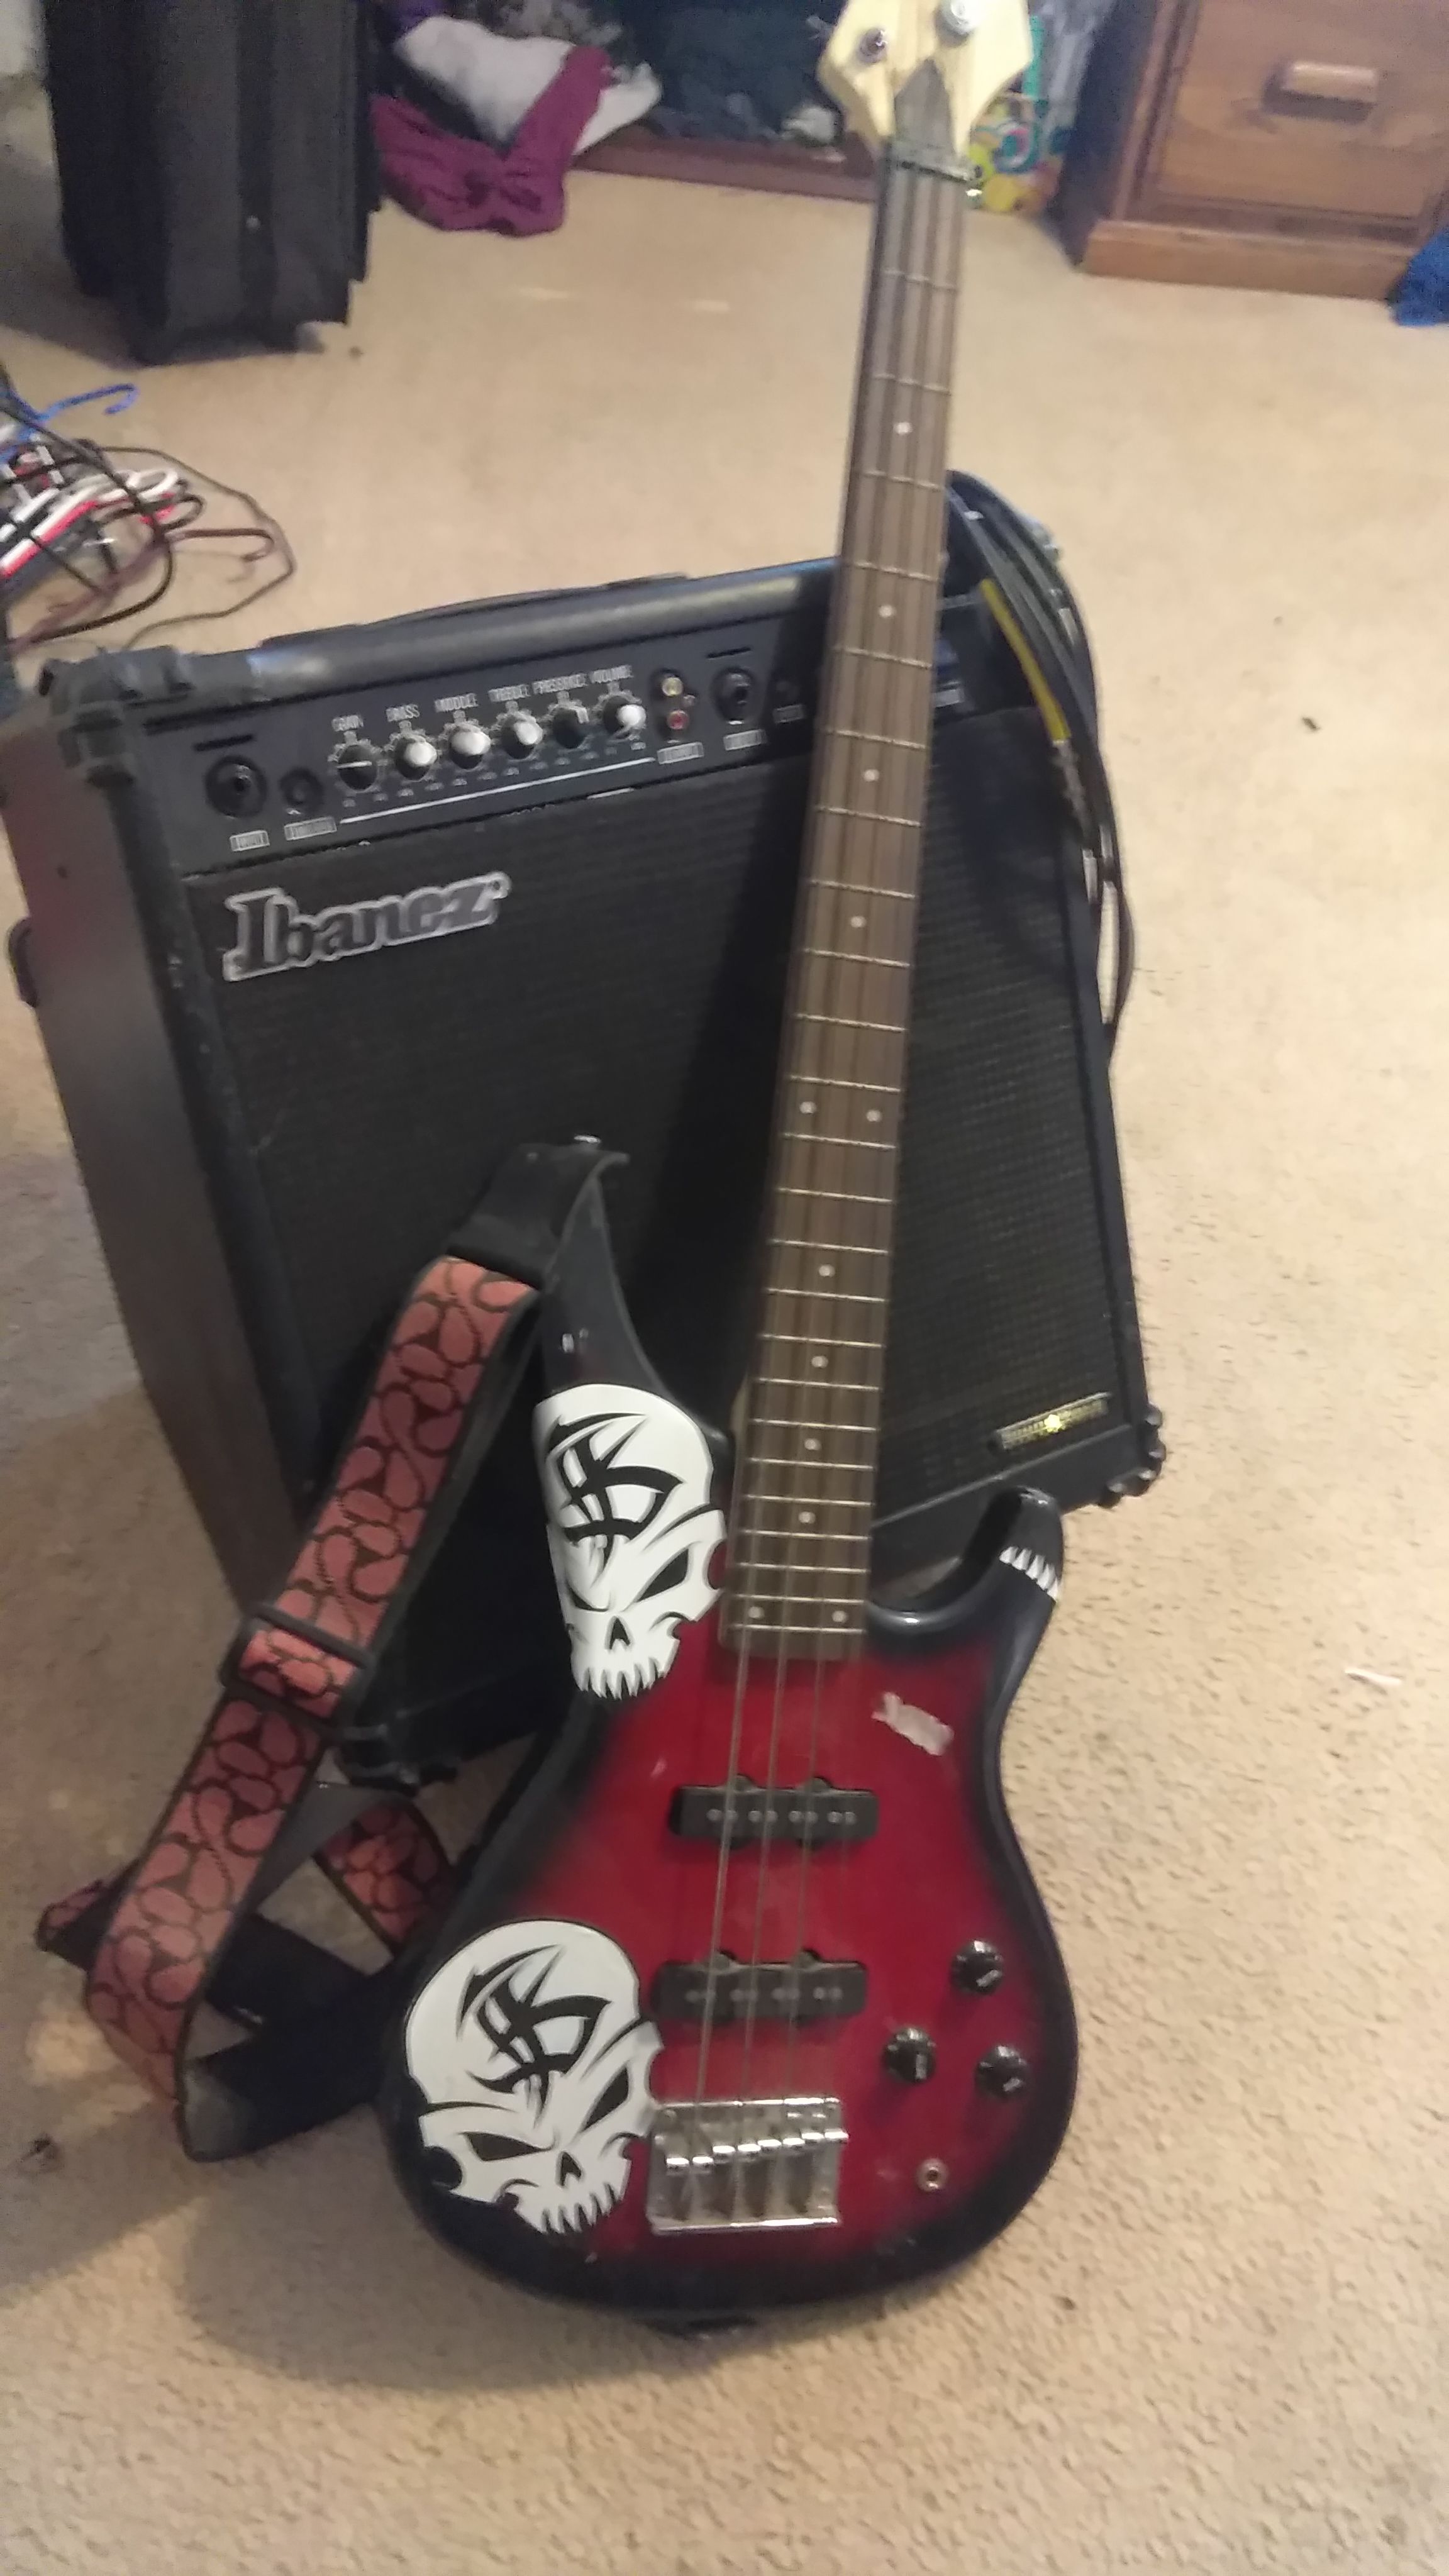 Bass guitar and amp for sale